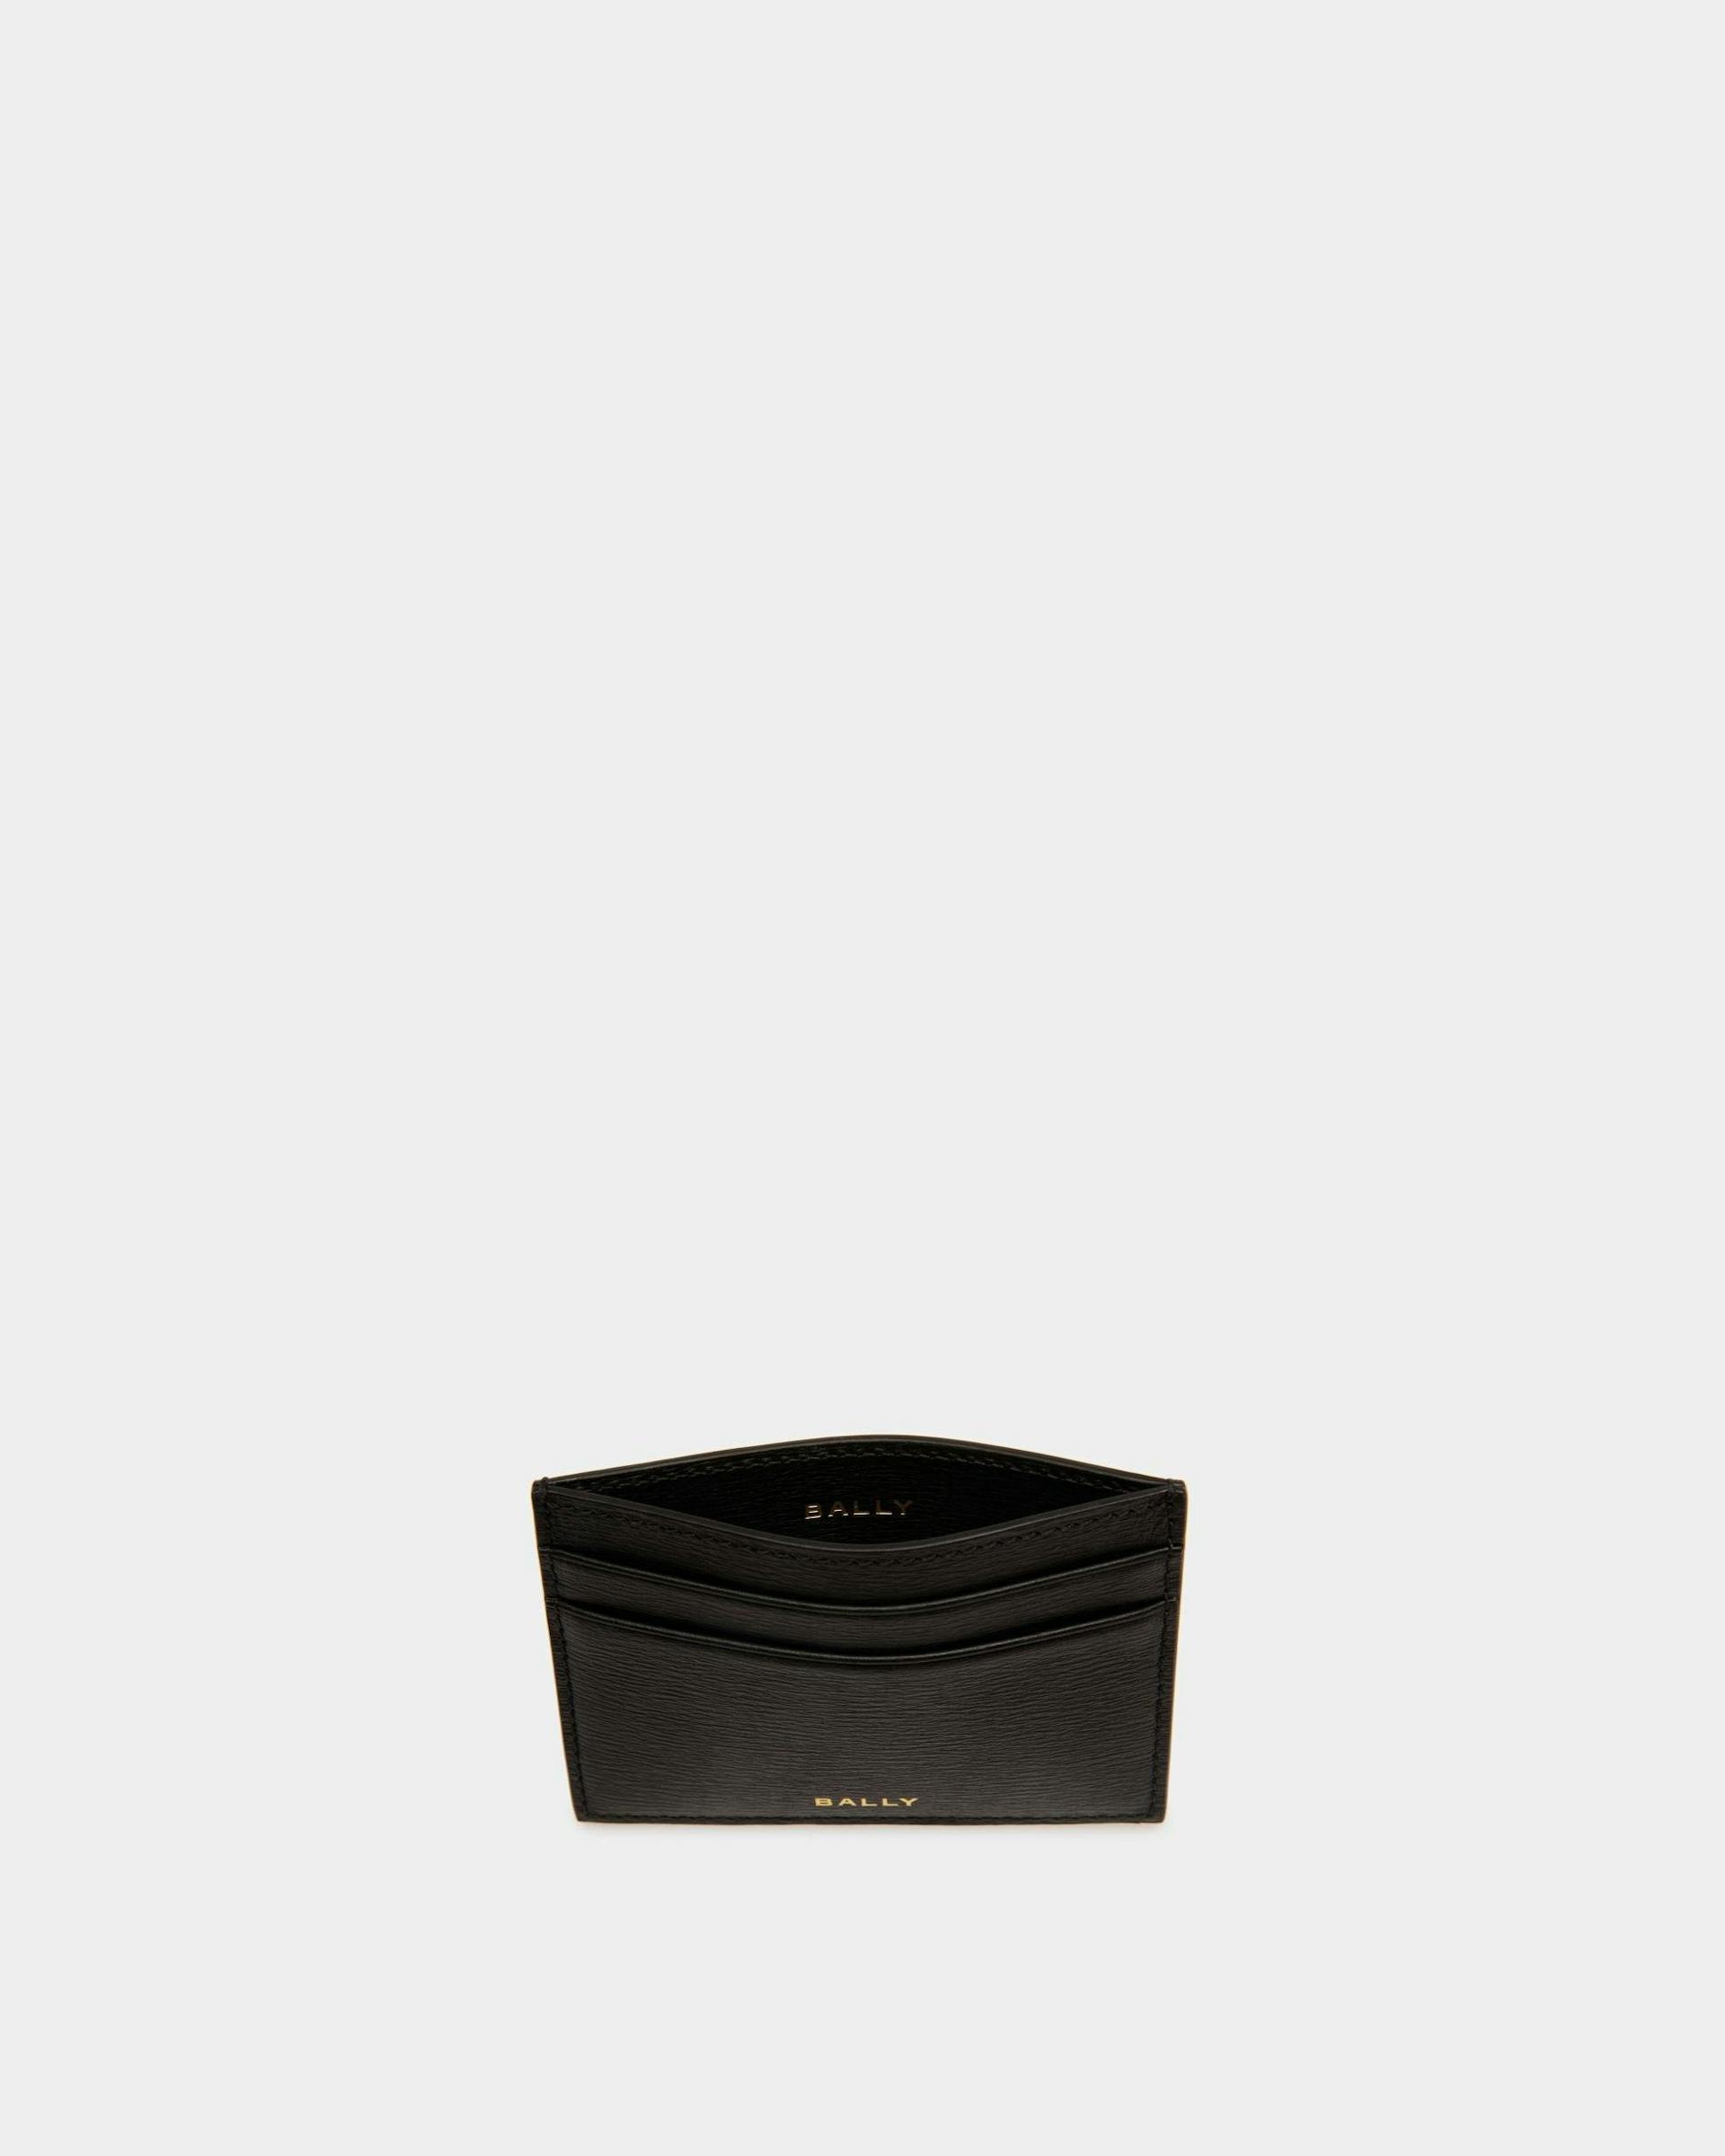 Men's Cny Card Holder In Black And Red Grained Leather | Bally | Still Life Open / Inside